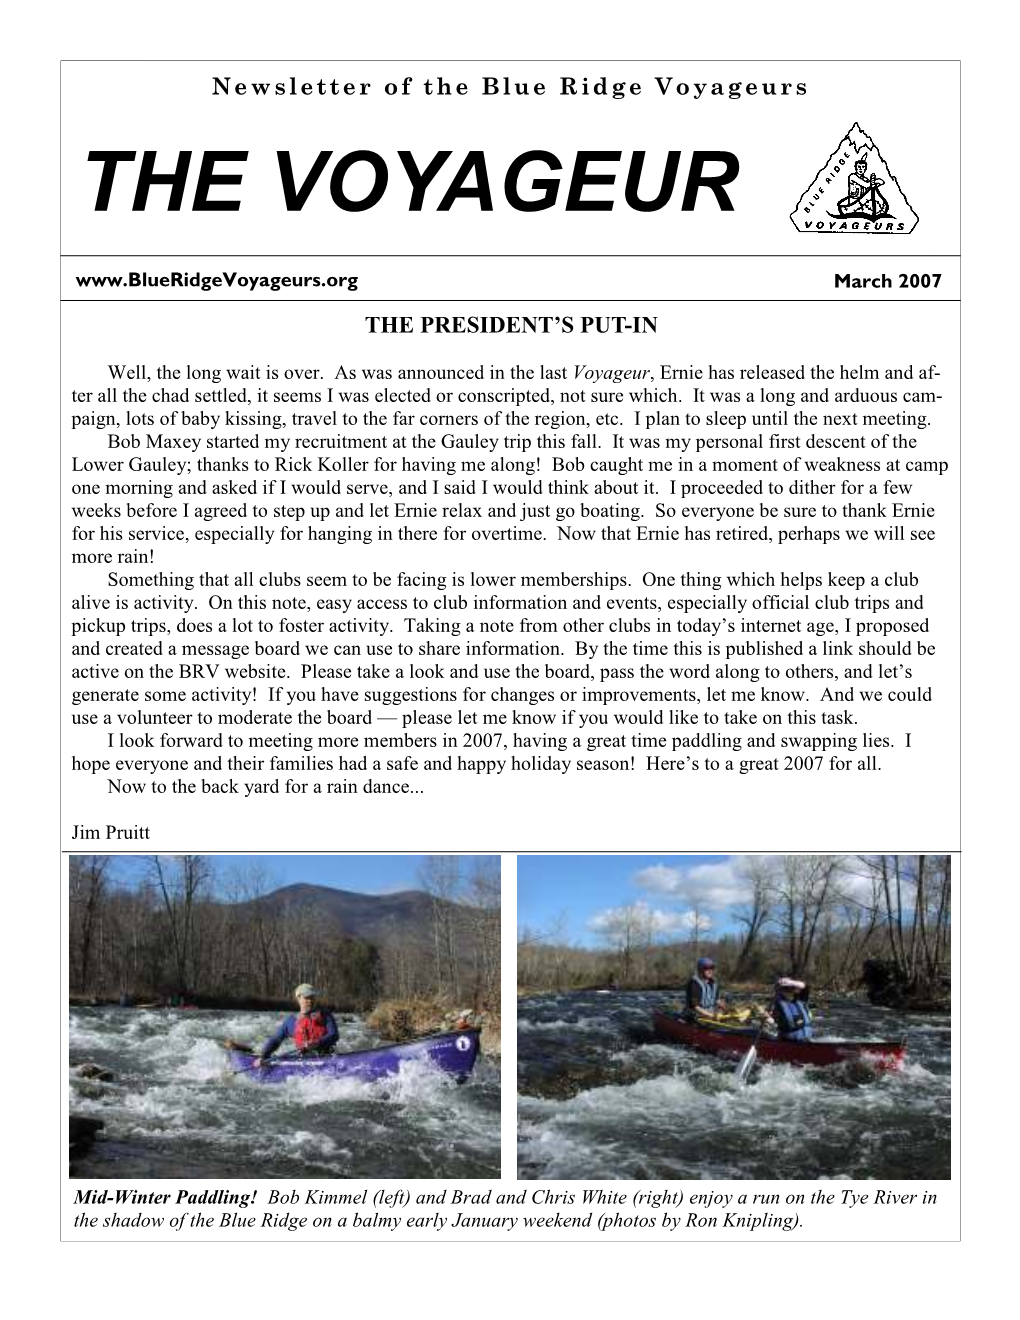 March 2007 Newsletter of the Blue Ridge Voyageurs the VOYAGEUR